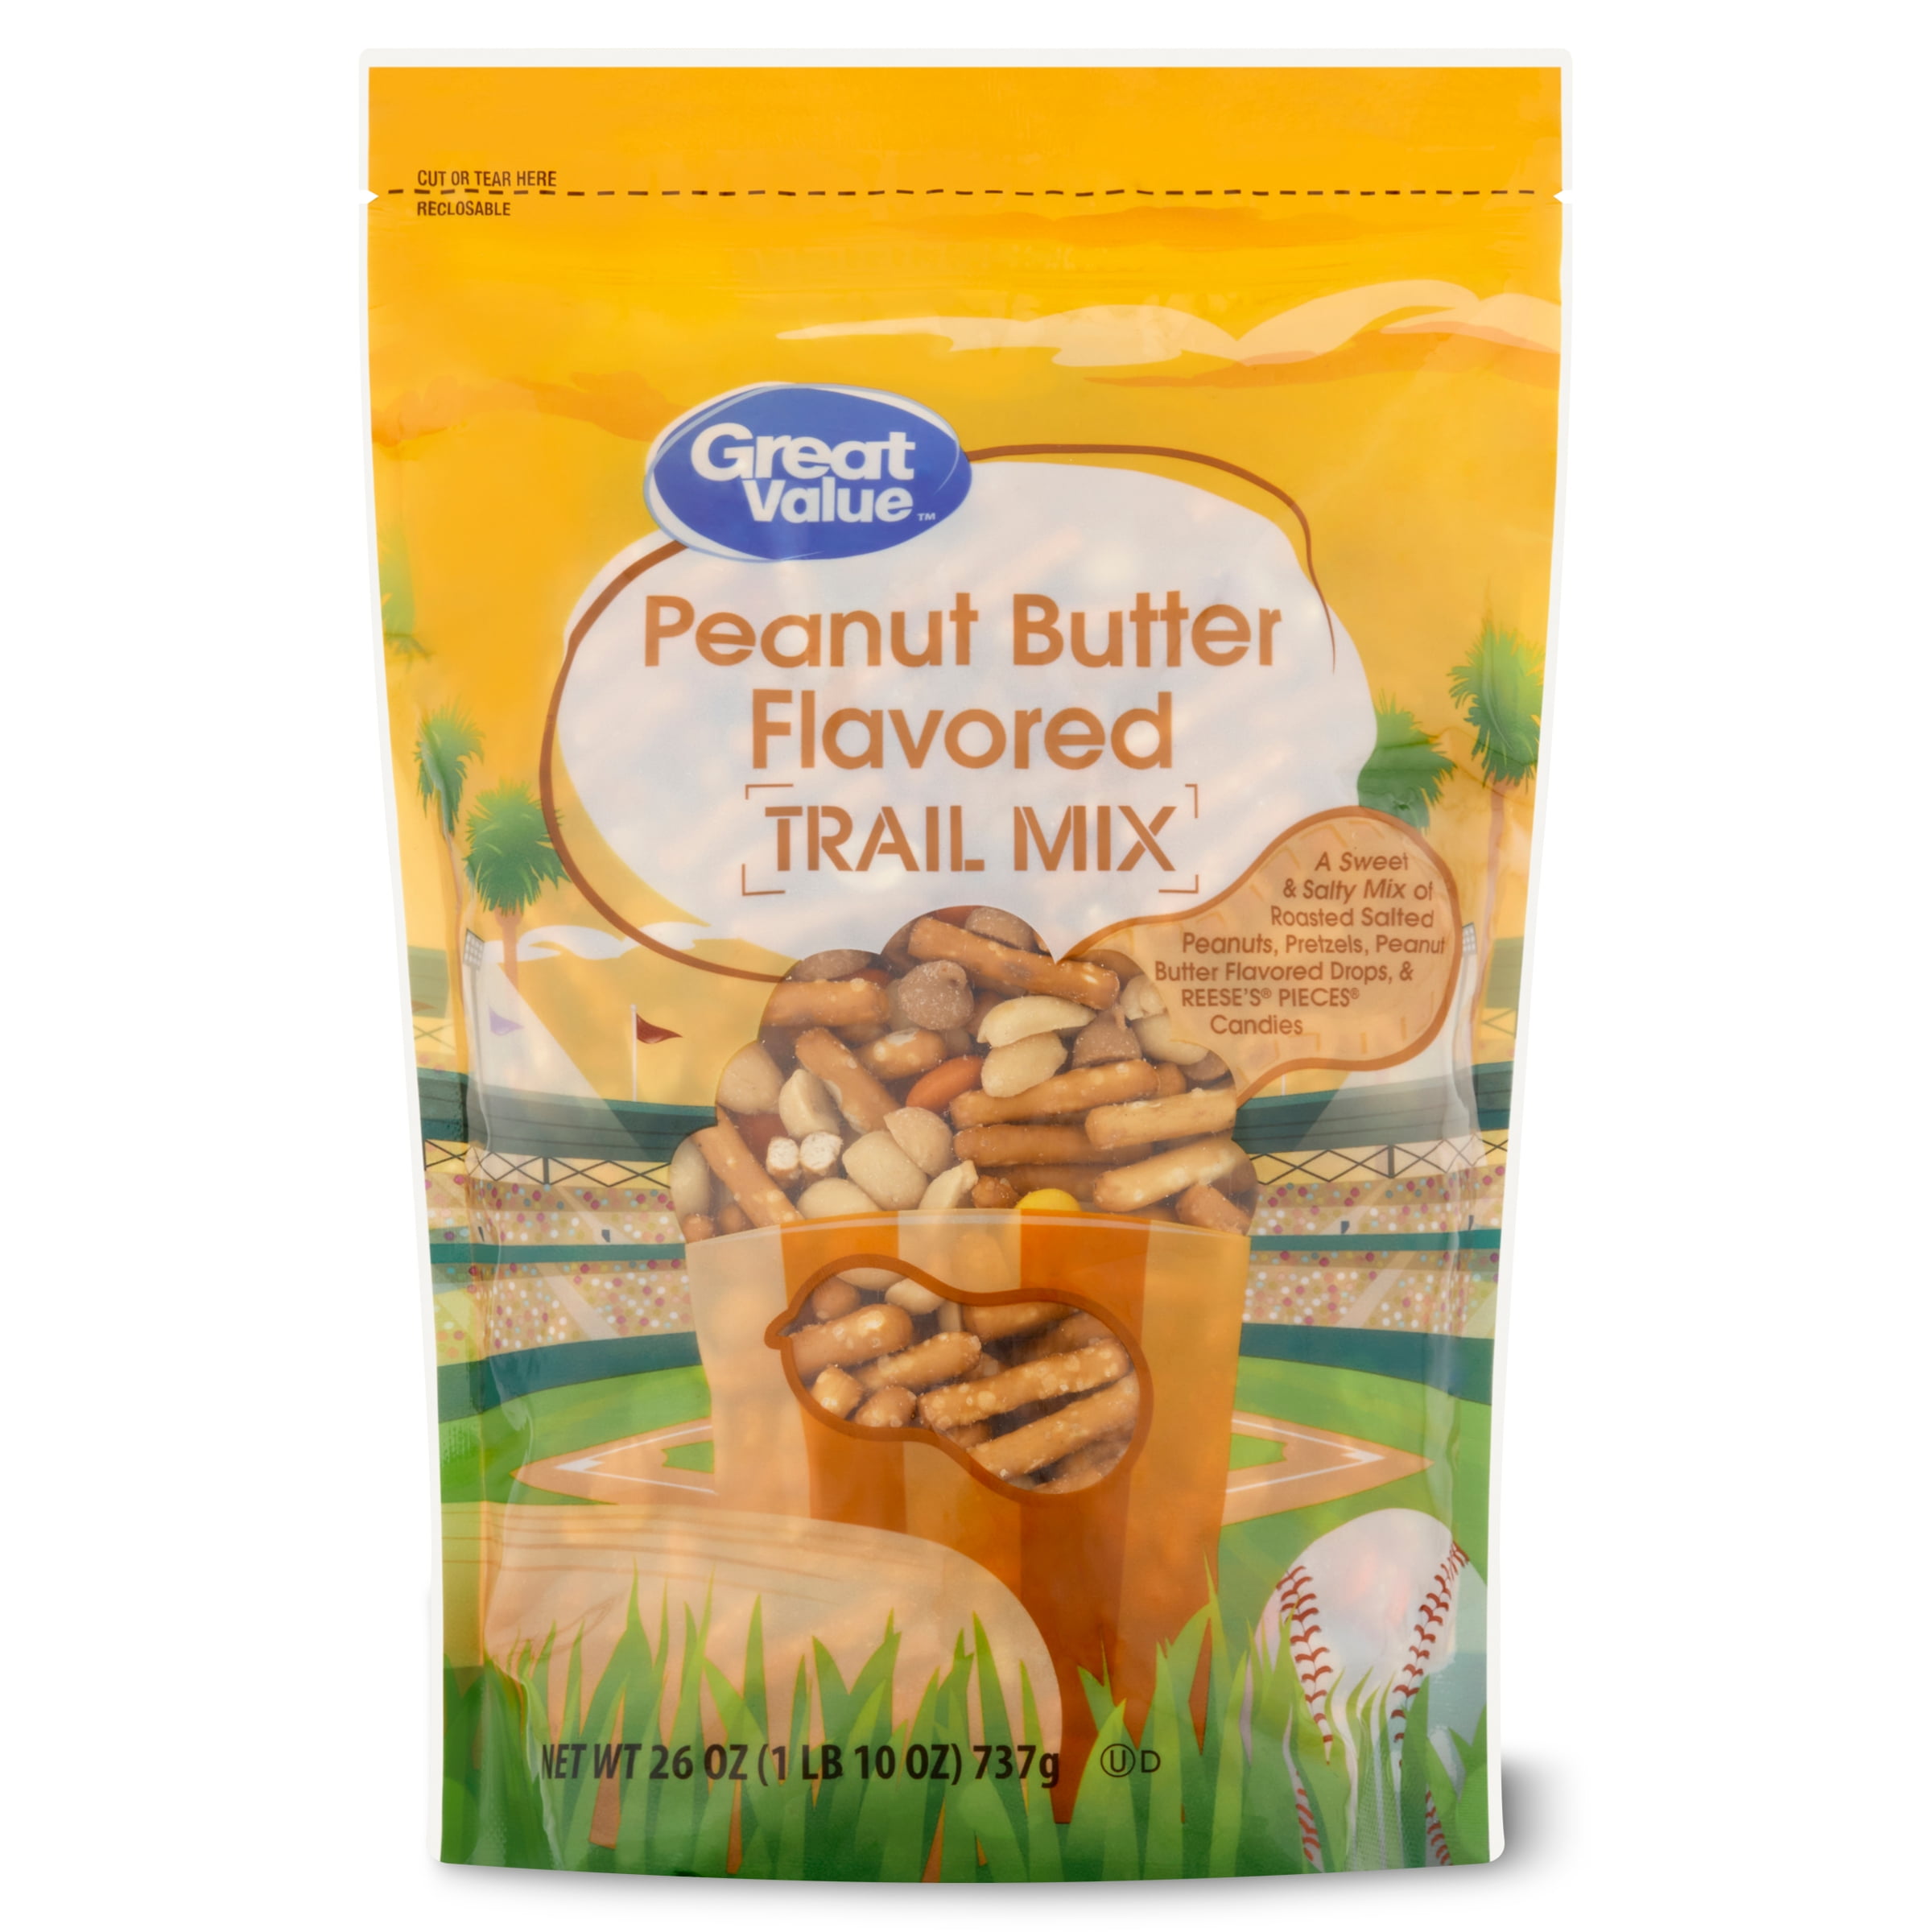 Udled hjul sne Great Value Peanut Butter Flavored Trail Mix Made with Reese's Pieces, 26  oz - Walmart.com